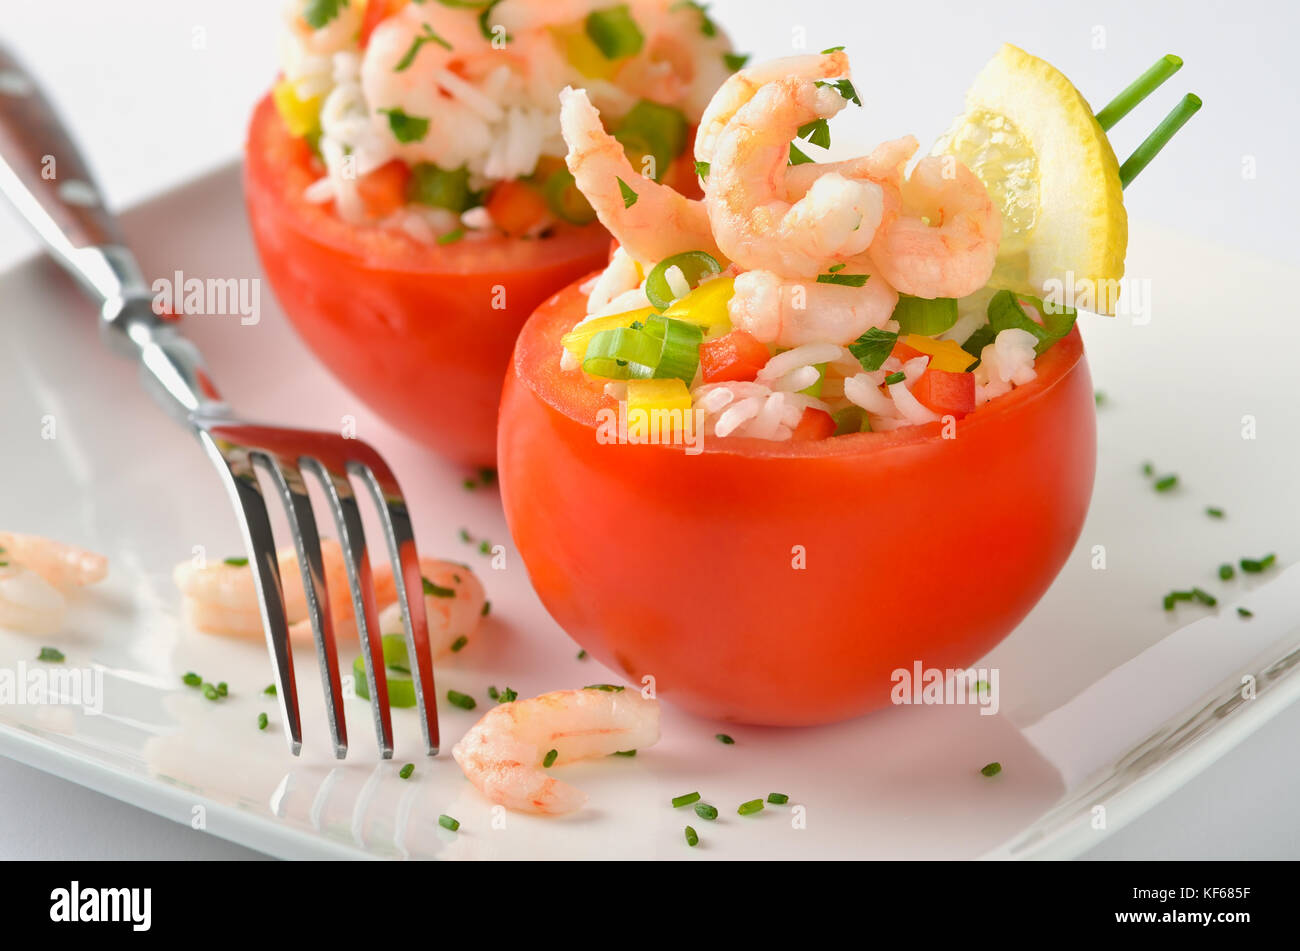 Stuffed, fresh tomatoes with shrimps, rice, bell peppers, spring onions, lemon, chives and parsley Stock Photo